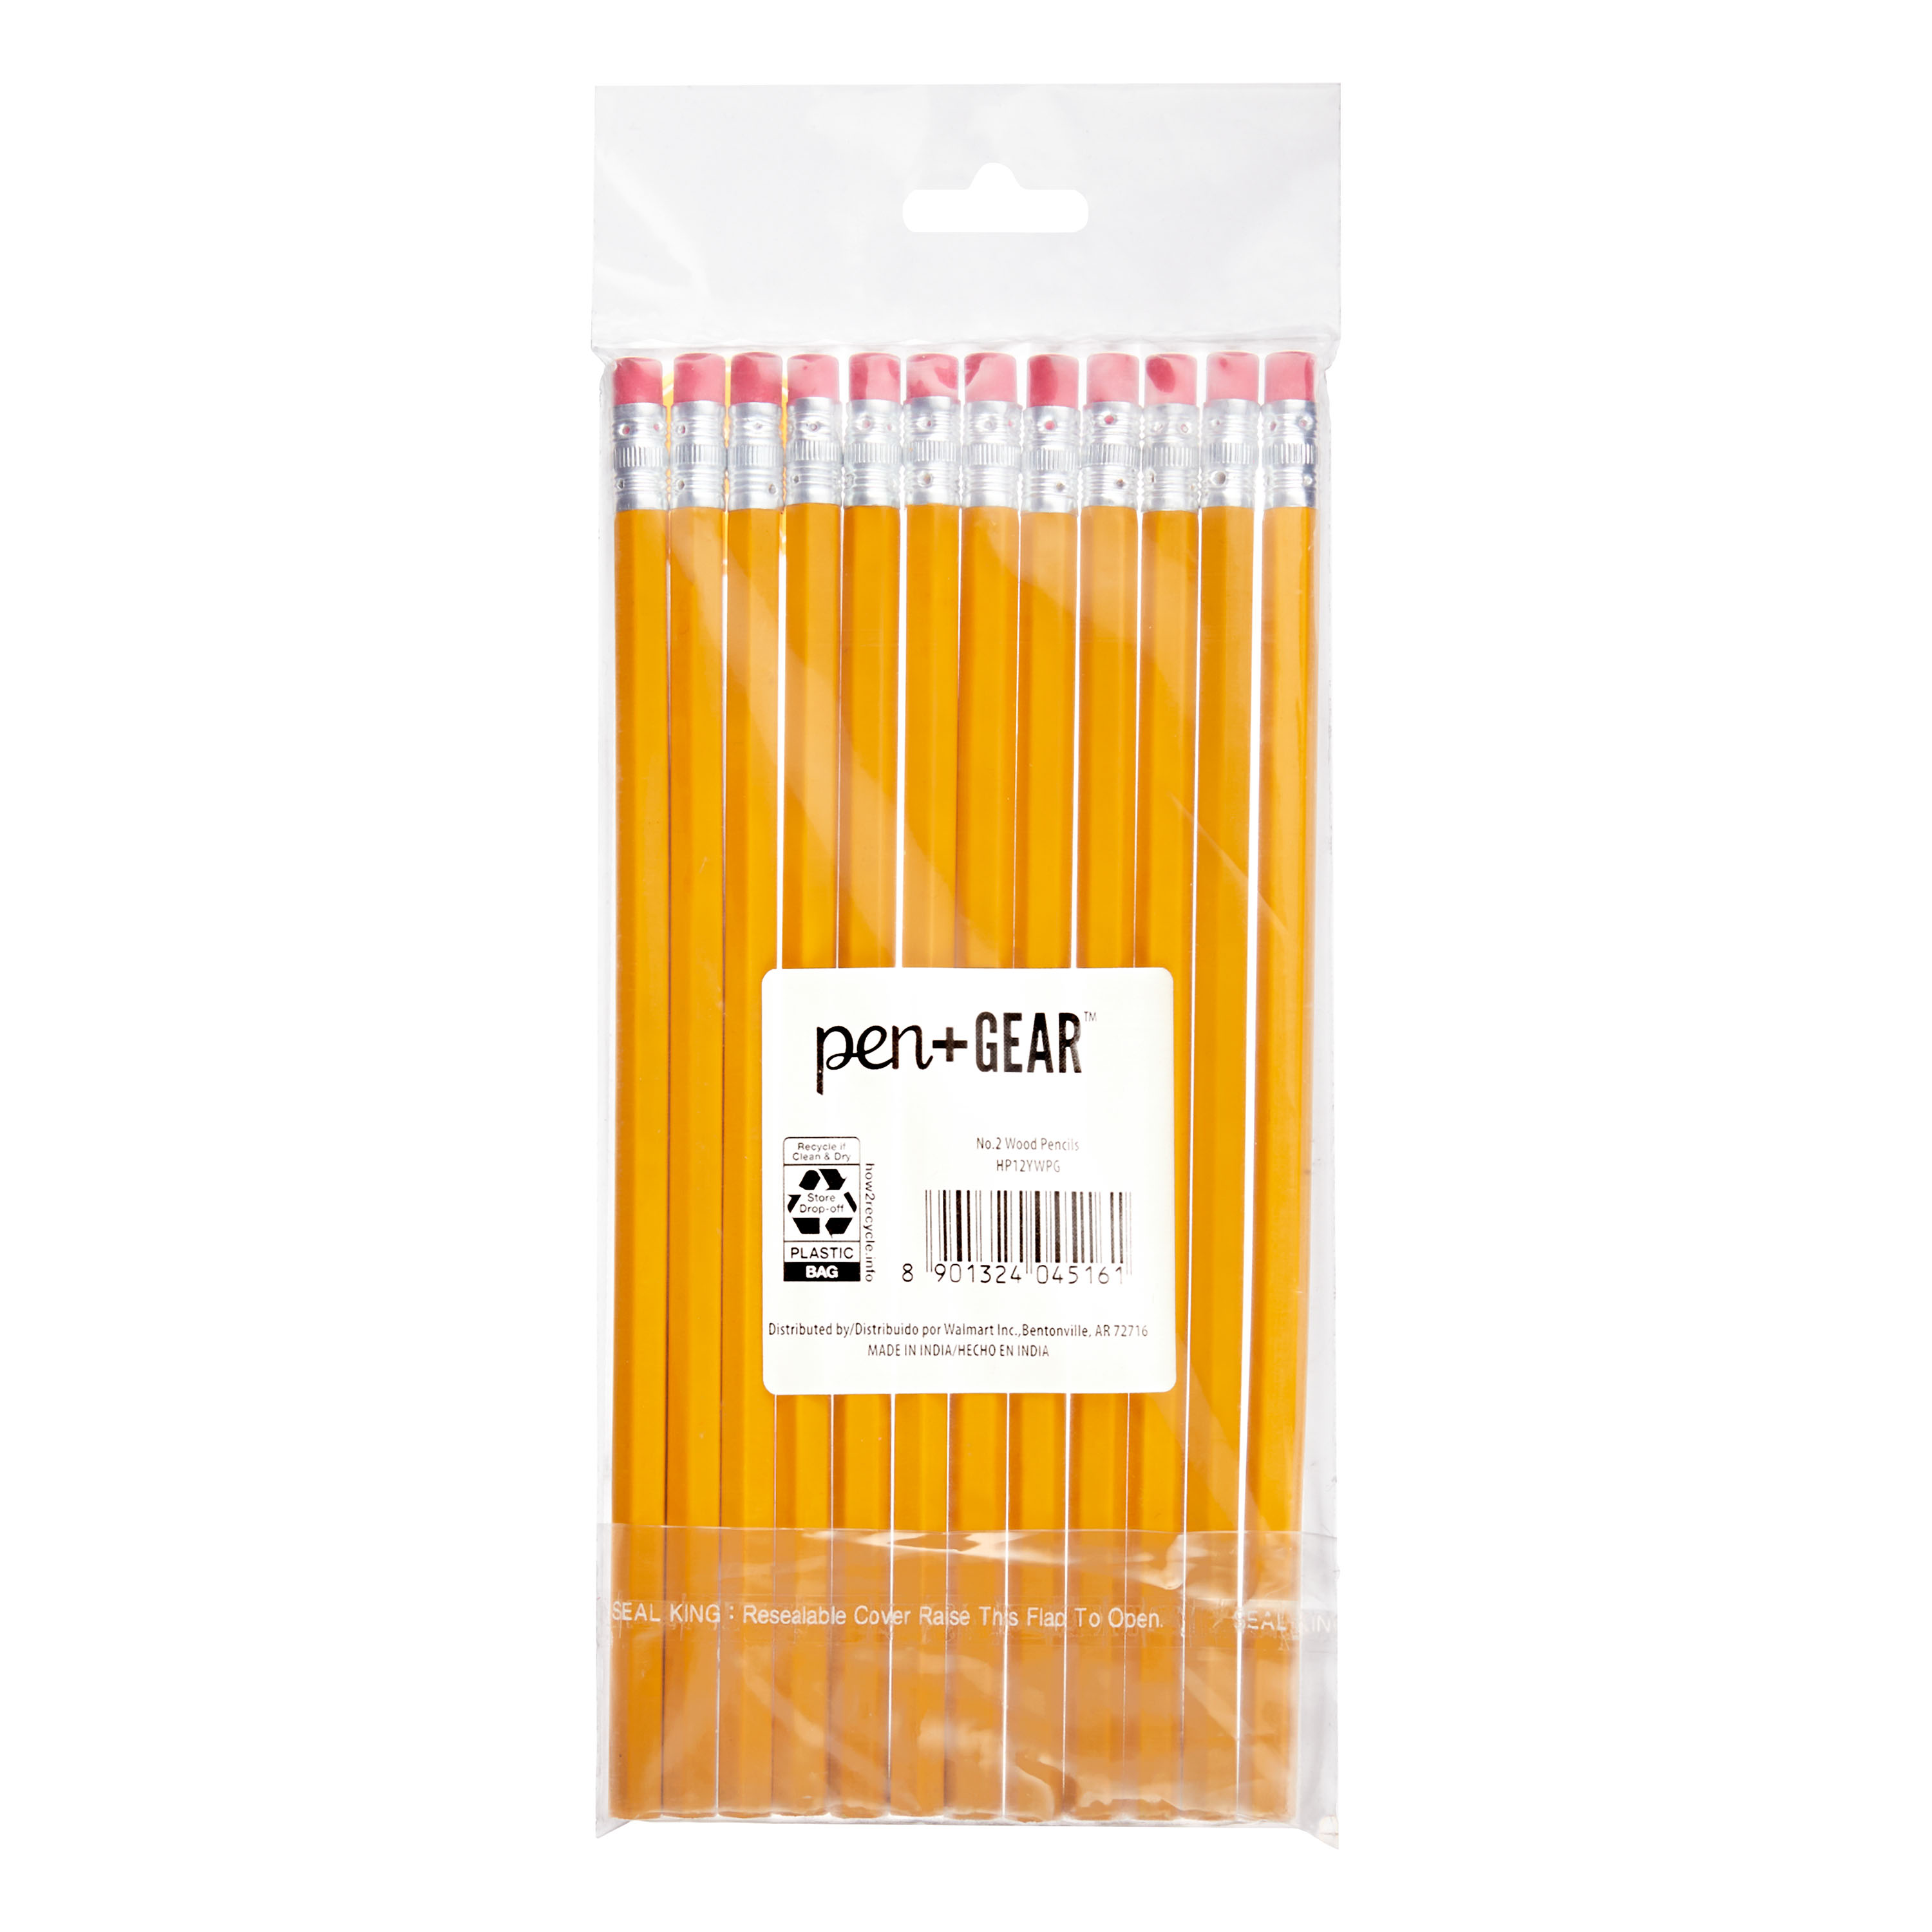 Pen+Gear No. 2 Wood Pencils, Unsharpened, 12 Count - image 5 of 6